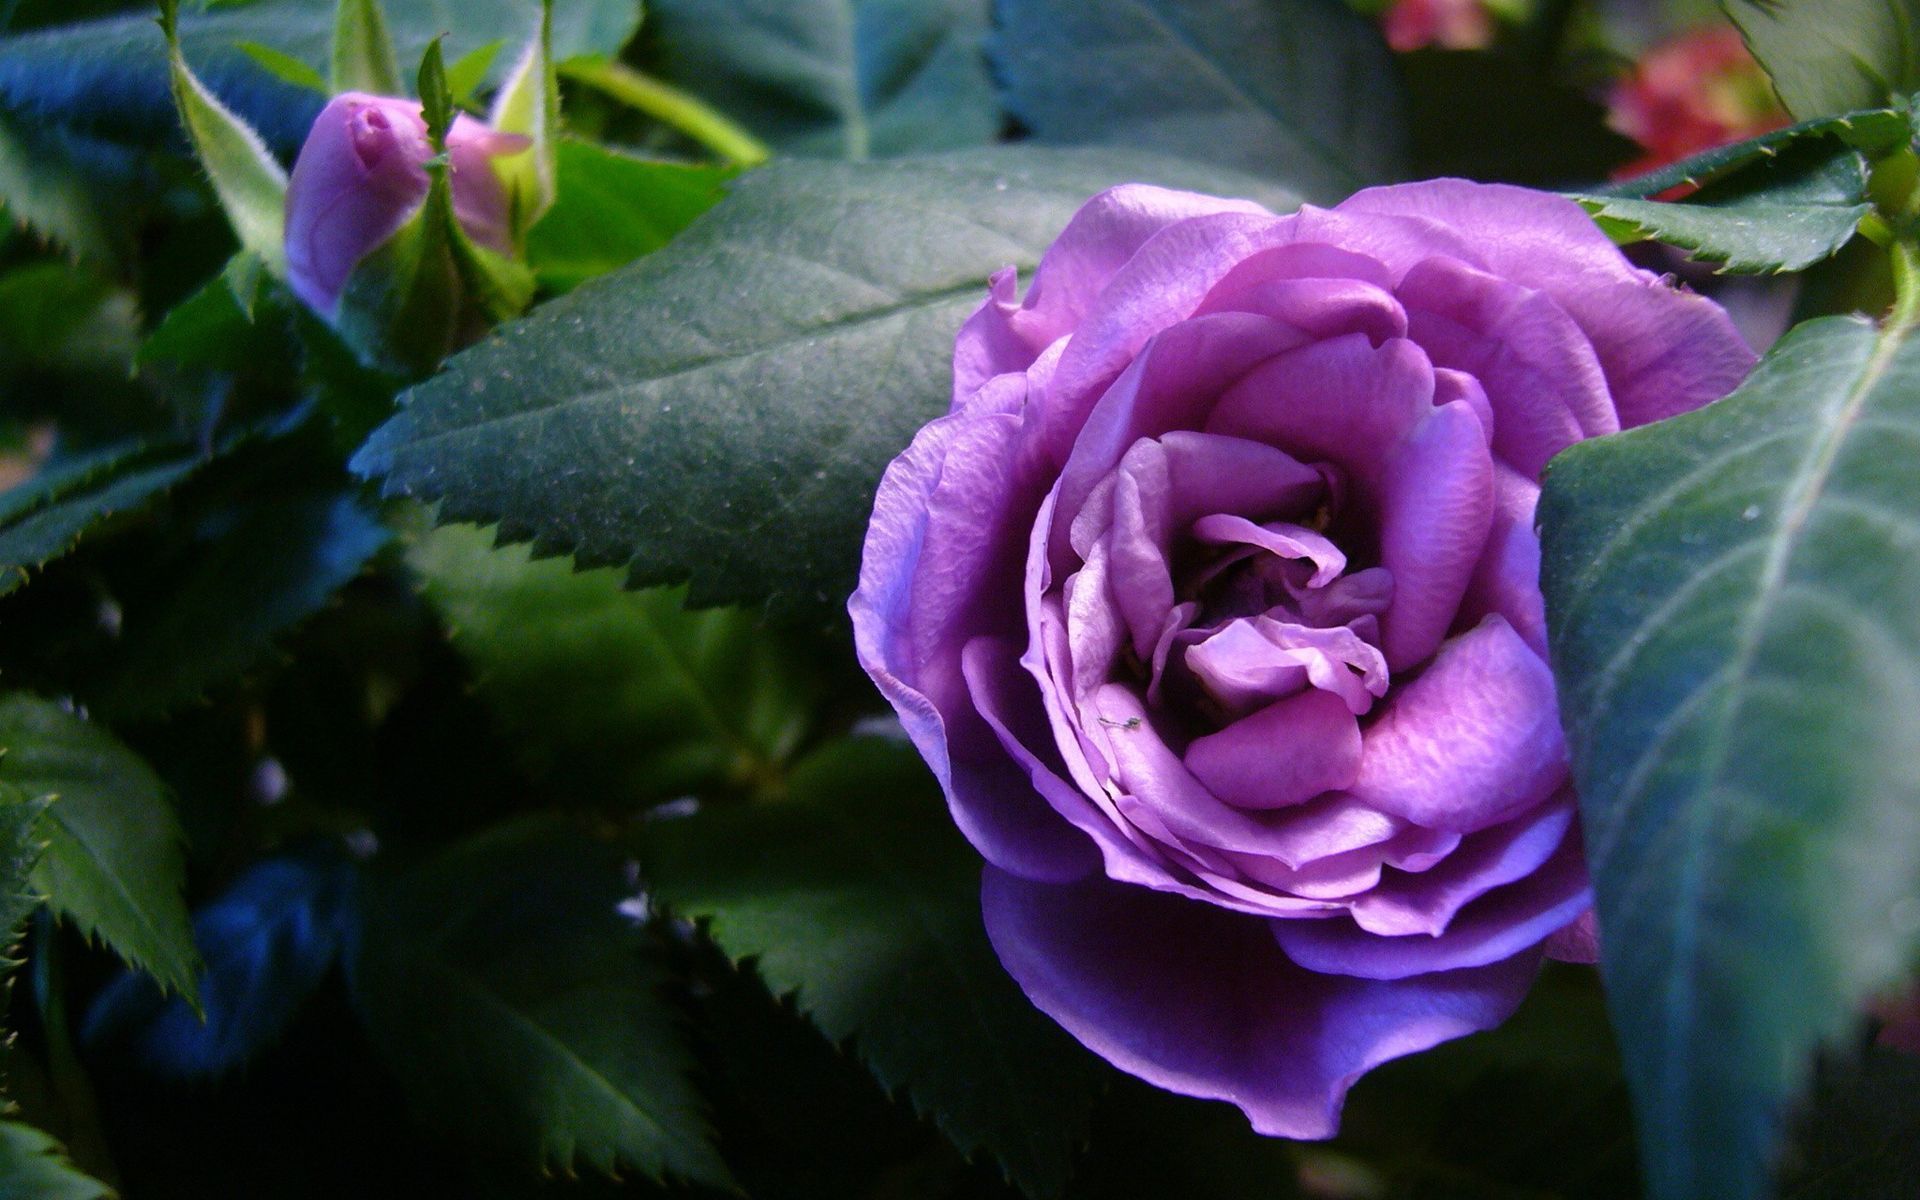 High Resolution Images Collection Of Rose - Beautiful Violet Roses Wallpaper Hd - HD Wallpaper 